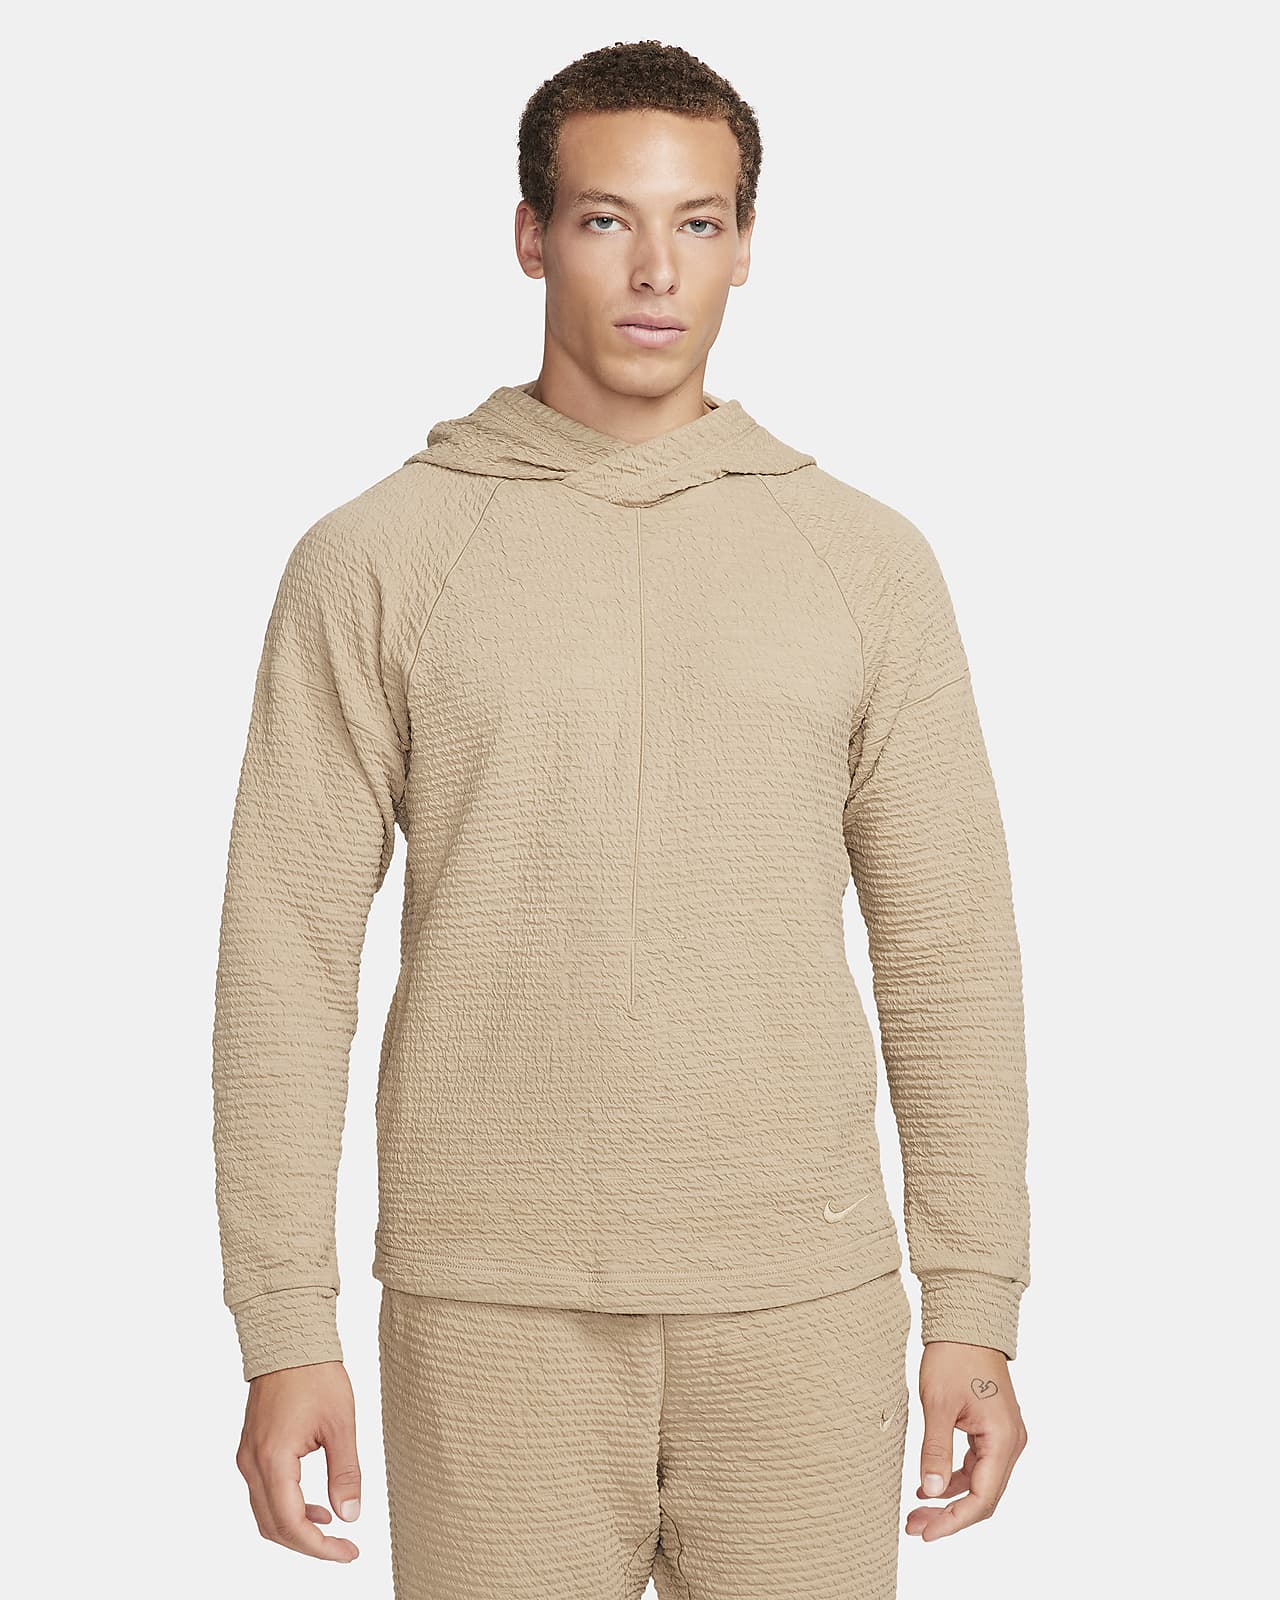 https://static.nike.com/a/images/t_PDP_1280_v1/f_auto,q_auto:eco/a4d149b6-319d-4a5d-8055-4175118a6e36/yoga-mens-dri-fit-pullover-lm5WSd.png